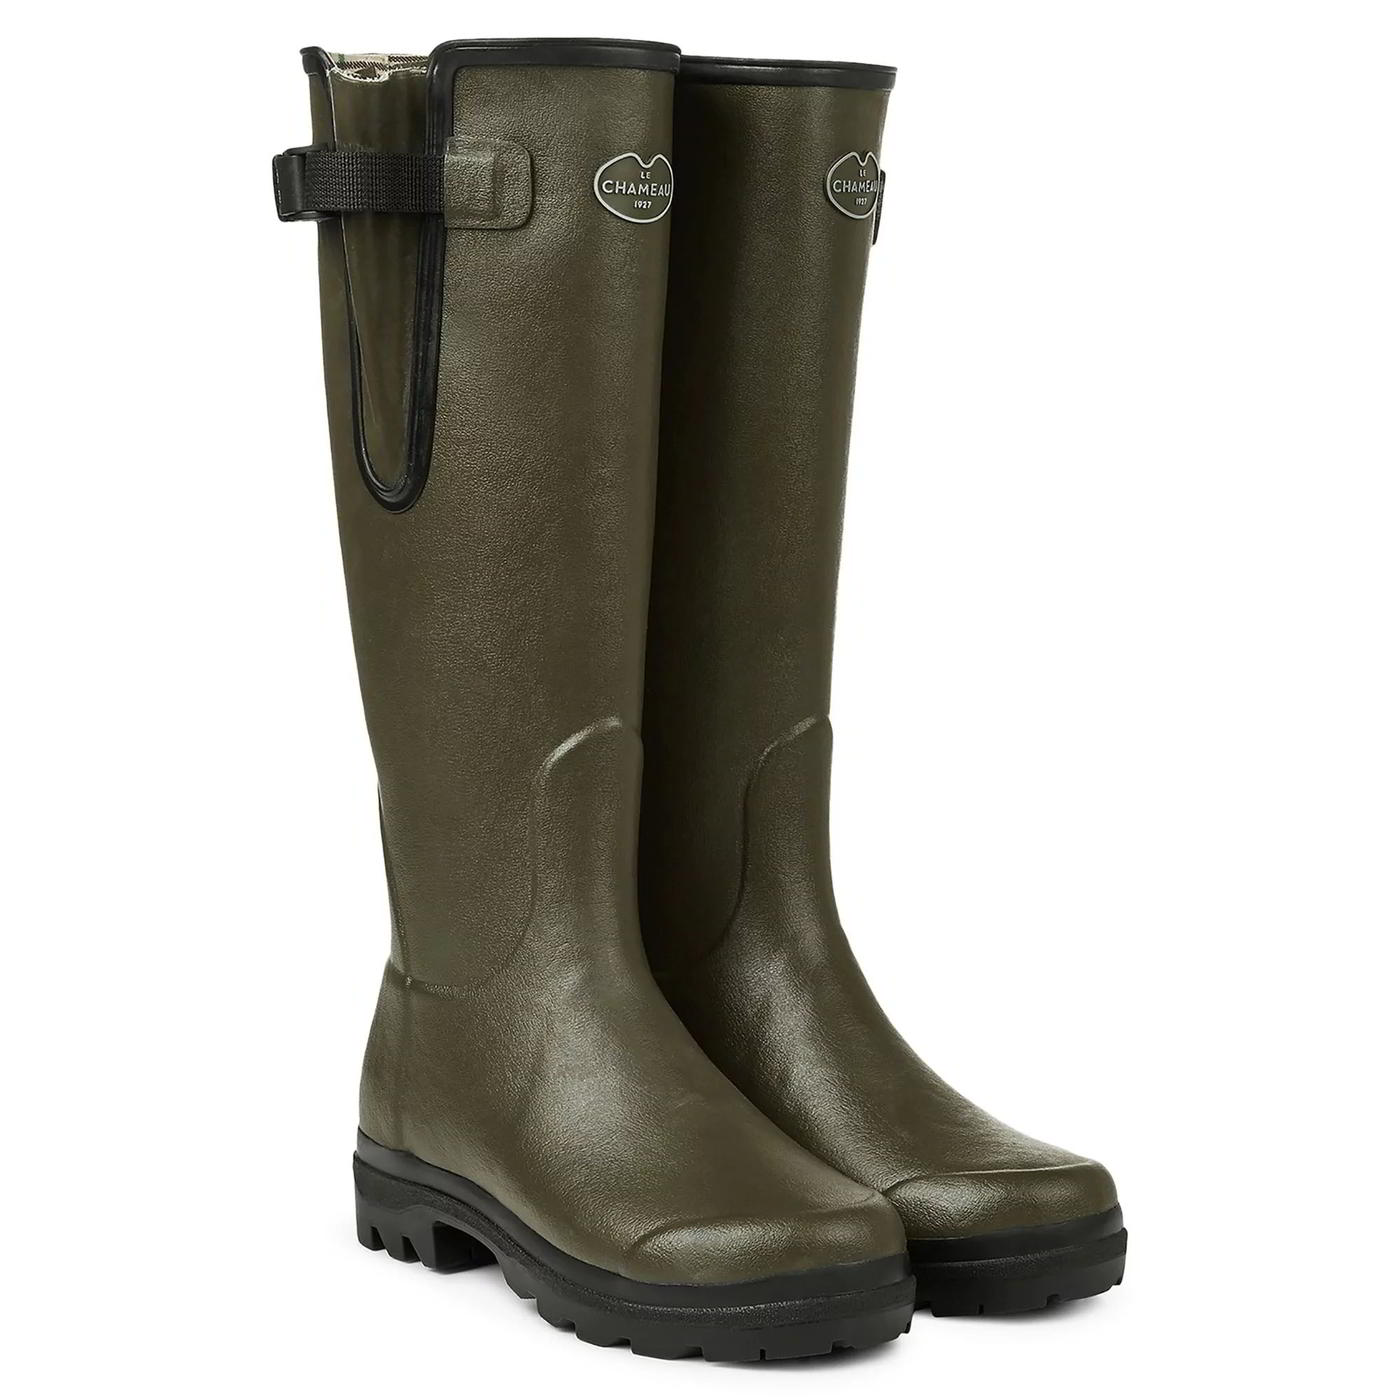 Le Chameau Womens Vierzon Jersey Lined Wellies Rain Boots - UK 4 Green 2951